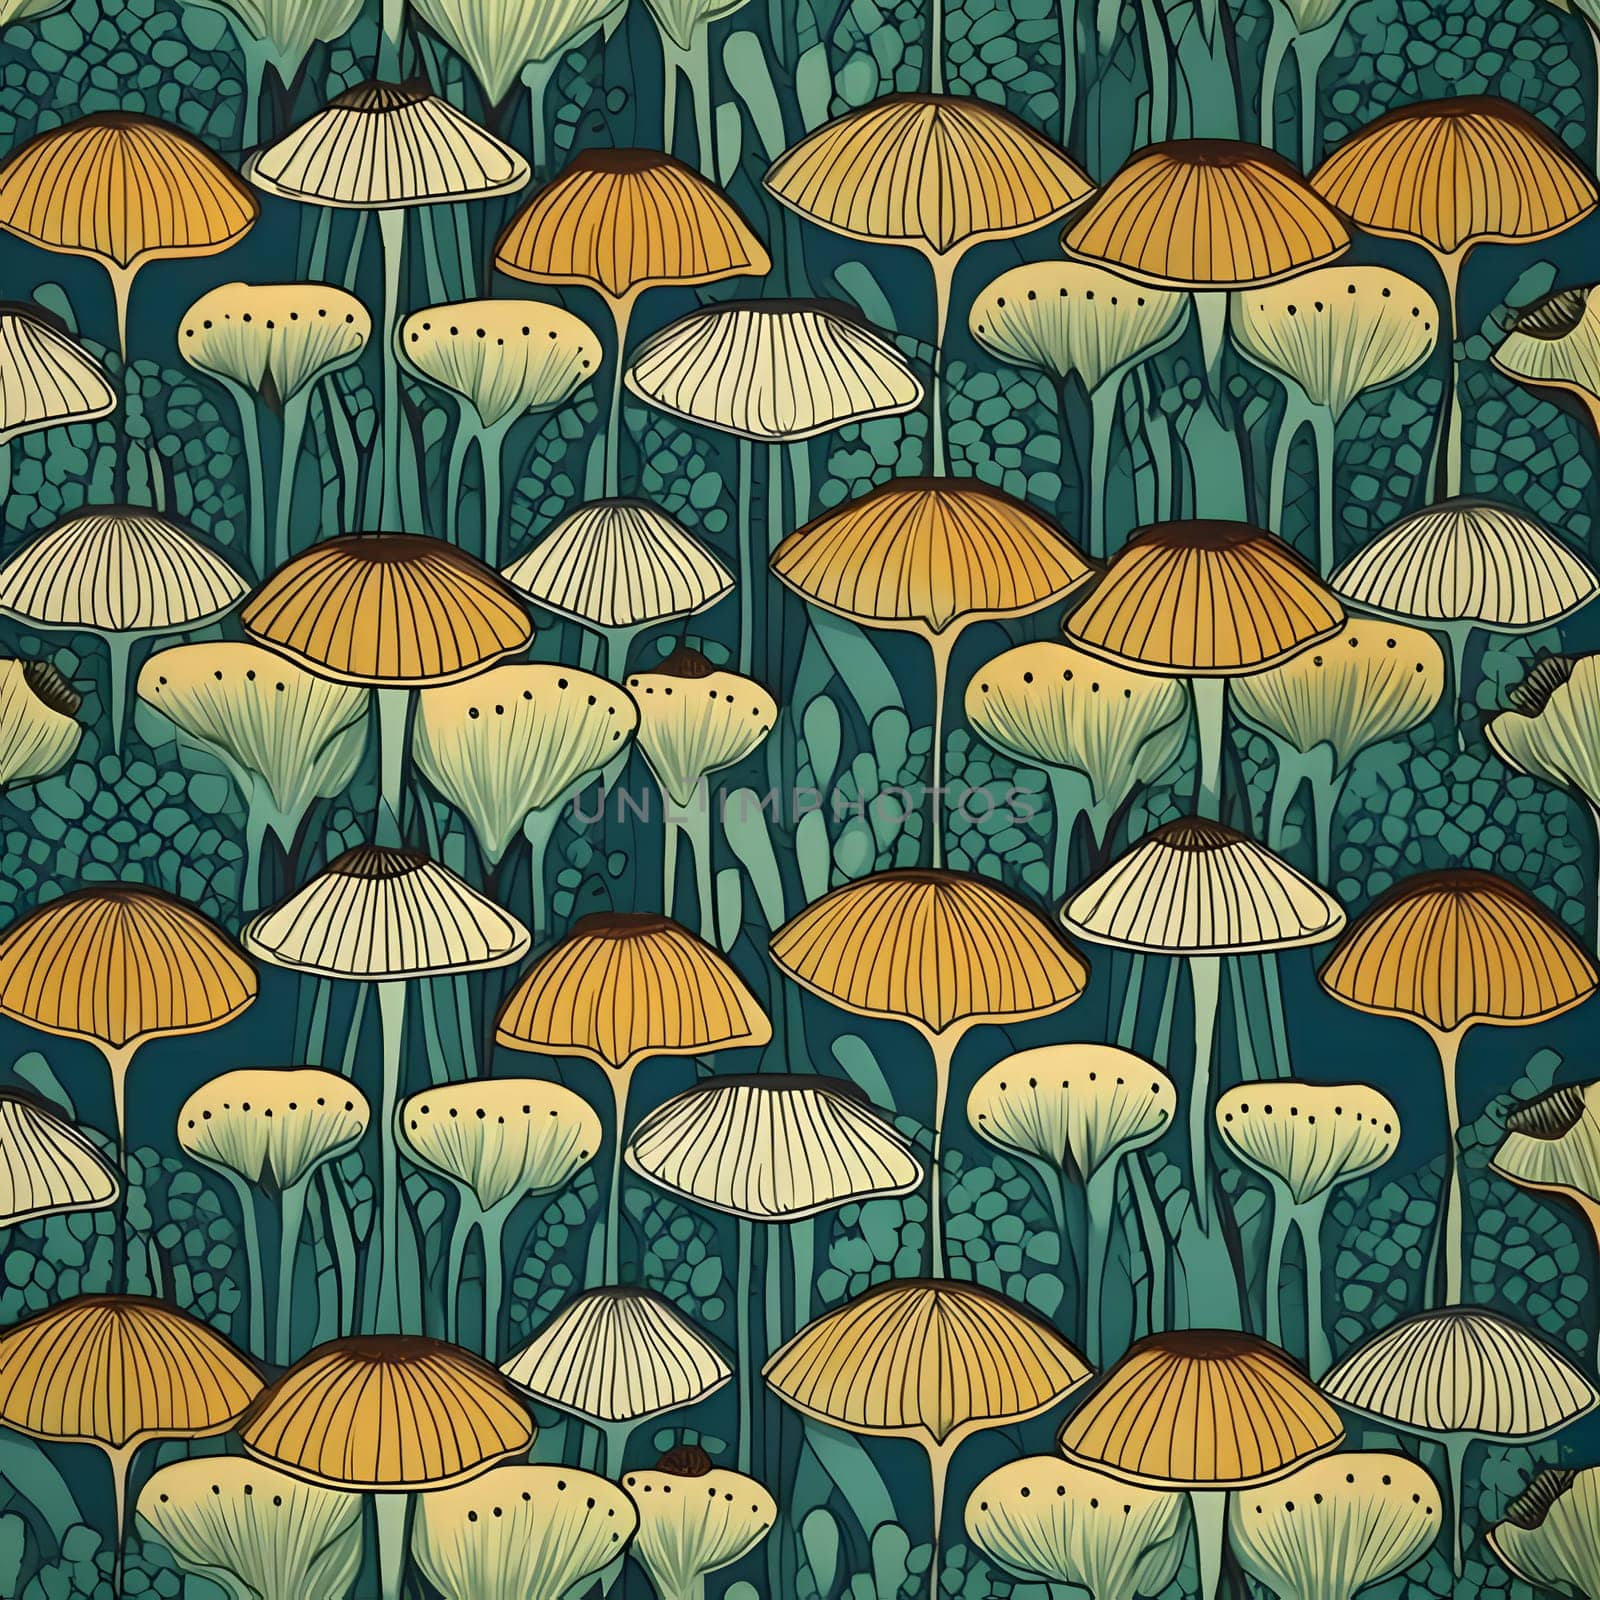 Patterns and banners backgrounds: Seamless pattern with mushrooms in cartoon style. Vector illustration.